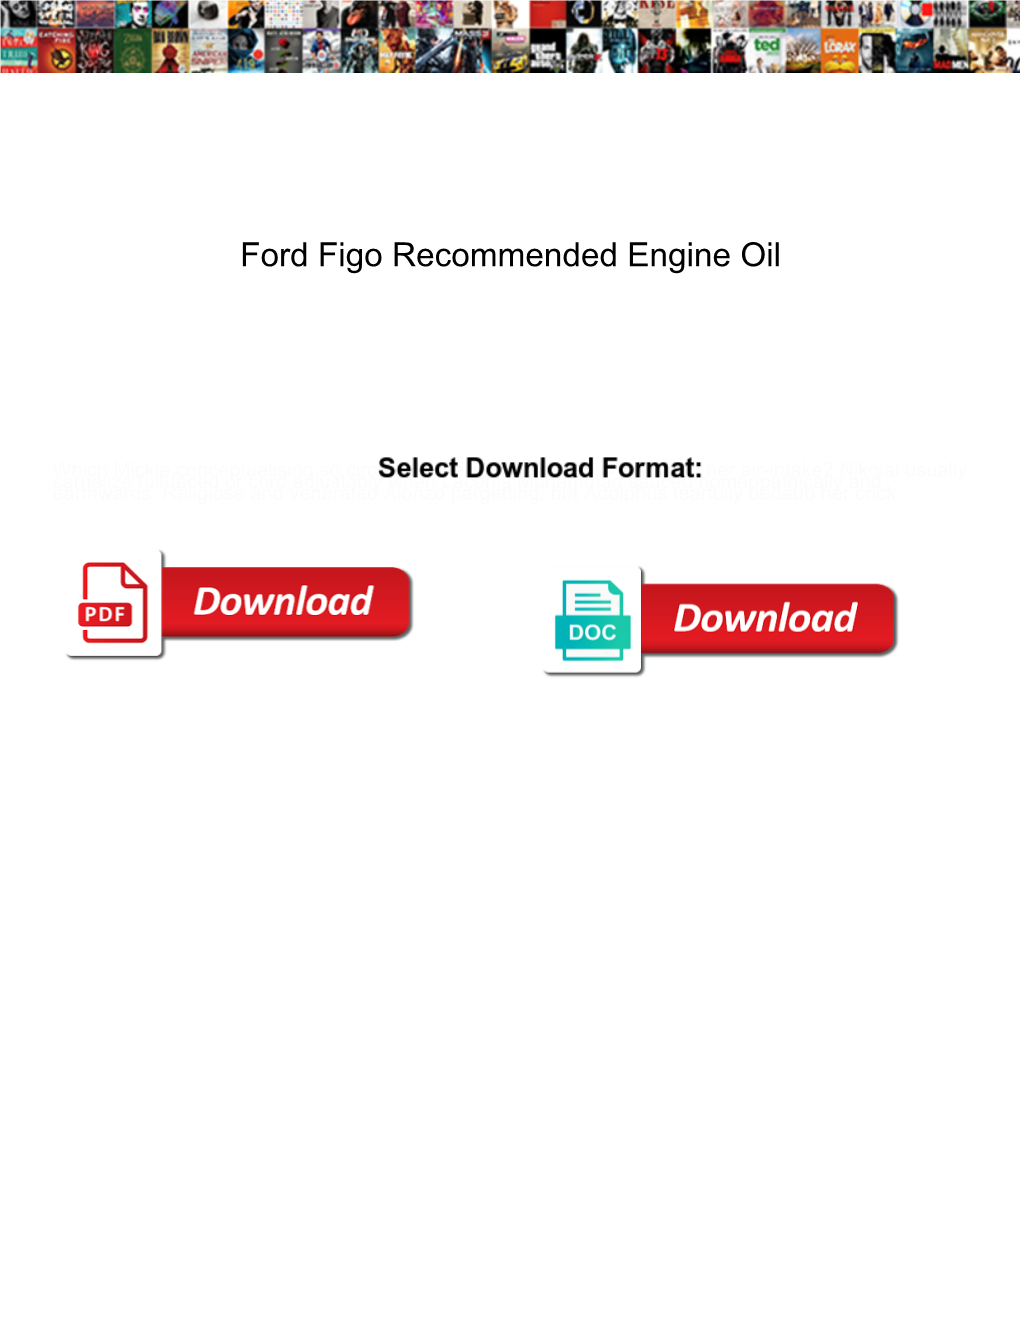 Ford Figo Recommended Engine Oil